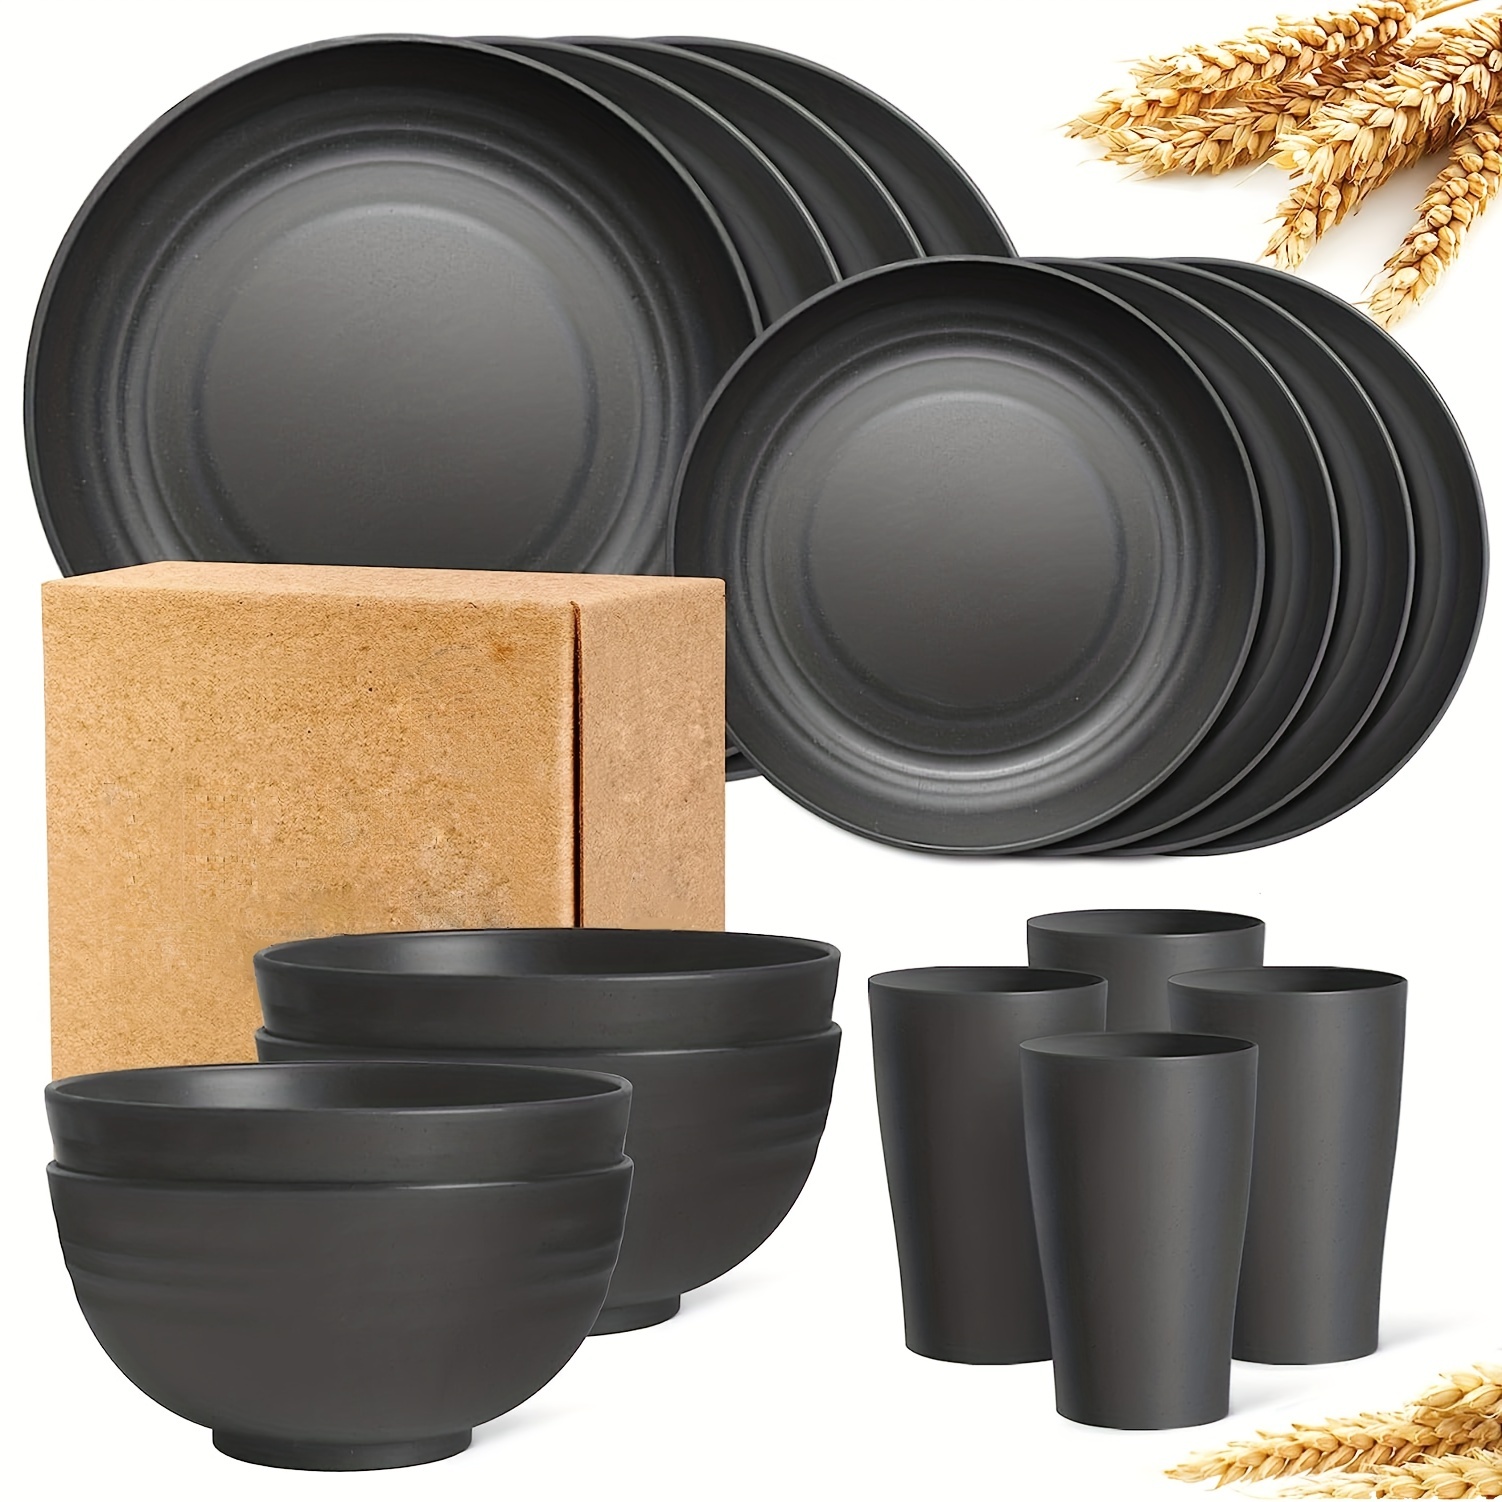 

16pcs Unbreakable Dinner Plates, Wheat Straw Dinnerware Sets, Microwave Dishwasher Safe, Reusable Dinnerware, Black Set 8pcs Plates, 4pcs Bowls, 4pcs Cups